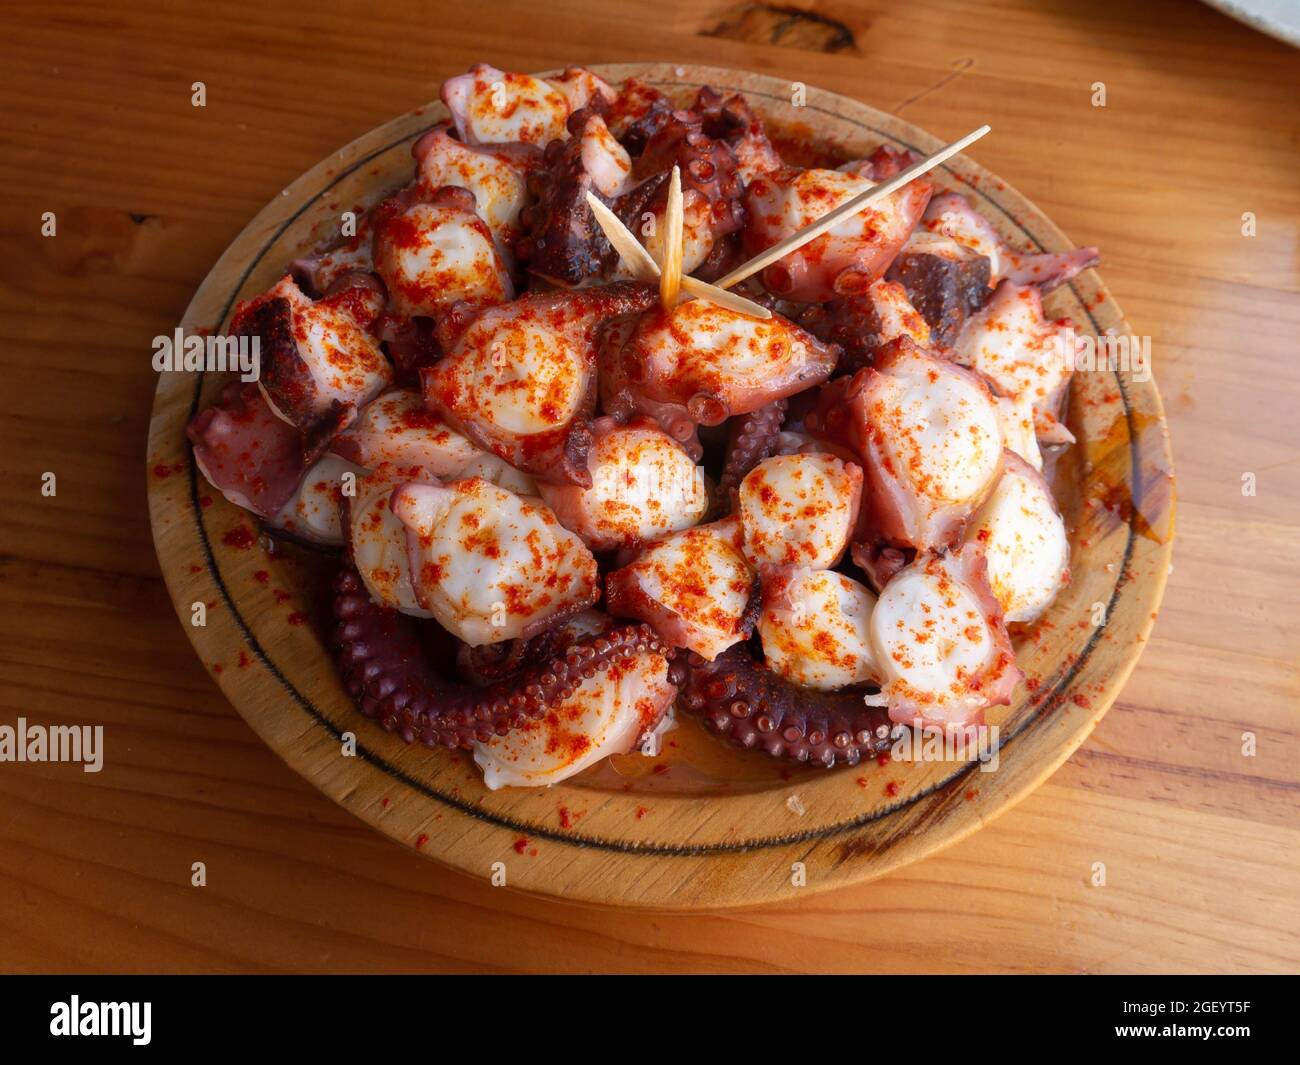 Pulpo a la gallega in Spanish meaning Galician-style octopus or polbo a feira meaning fair-style octopus in gallego. Stock Photo